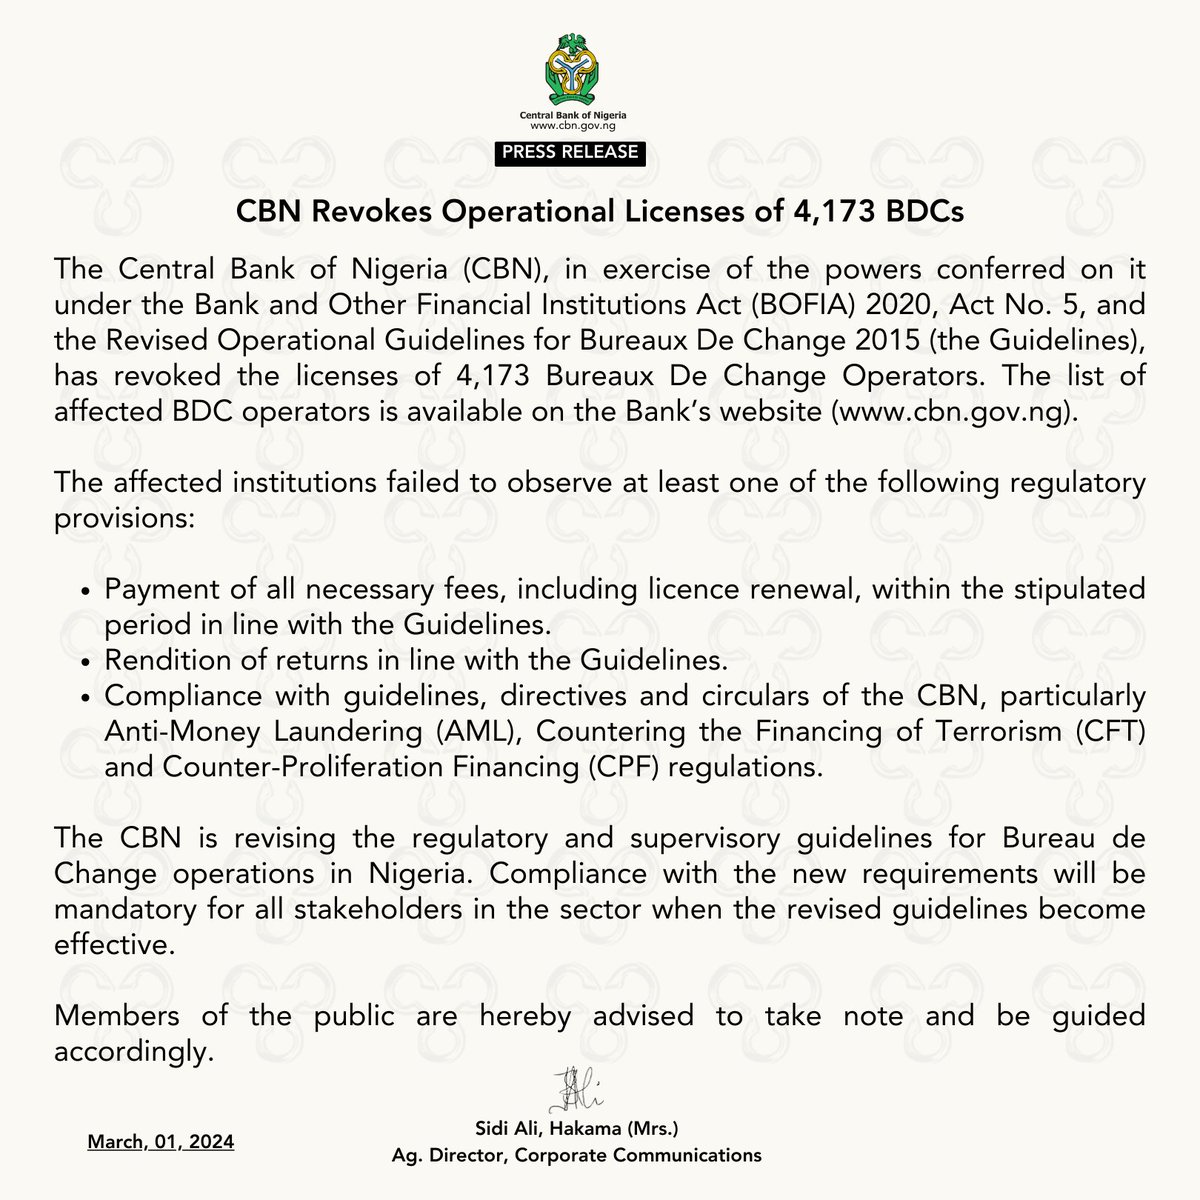 PRESS RELEASE: CBN Revokes Operational Licenses of 4,173 BDCs. Access the list here... ow.ly/f0Ln50QJZcM